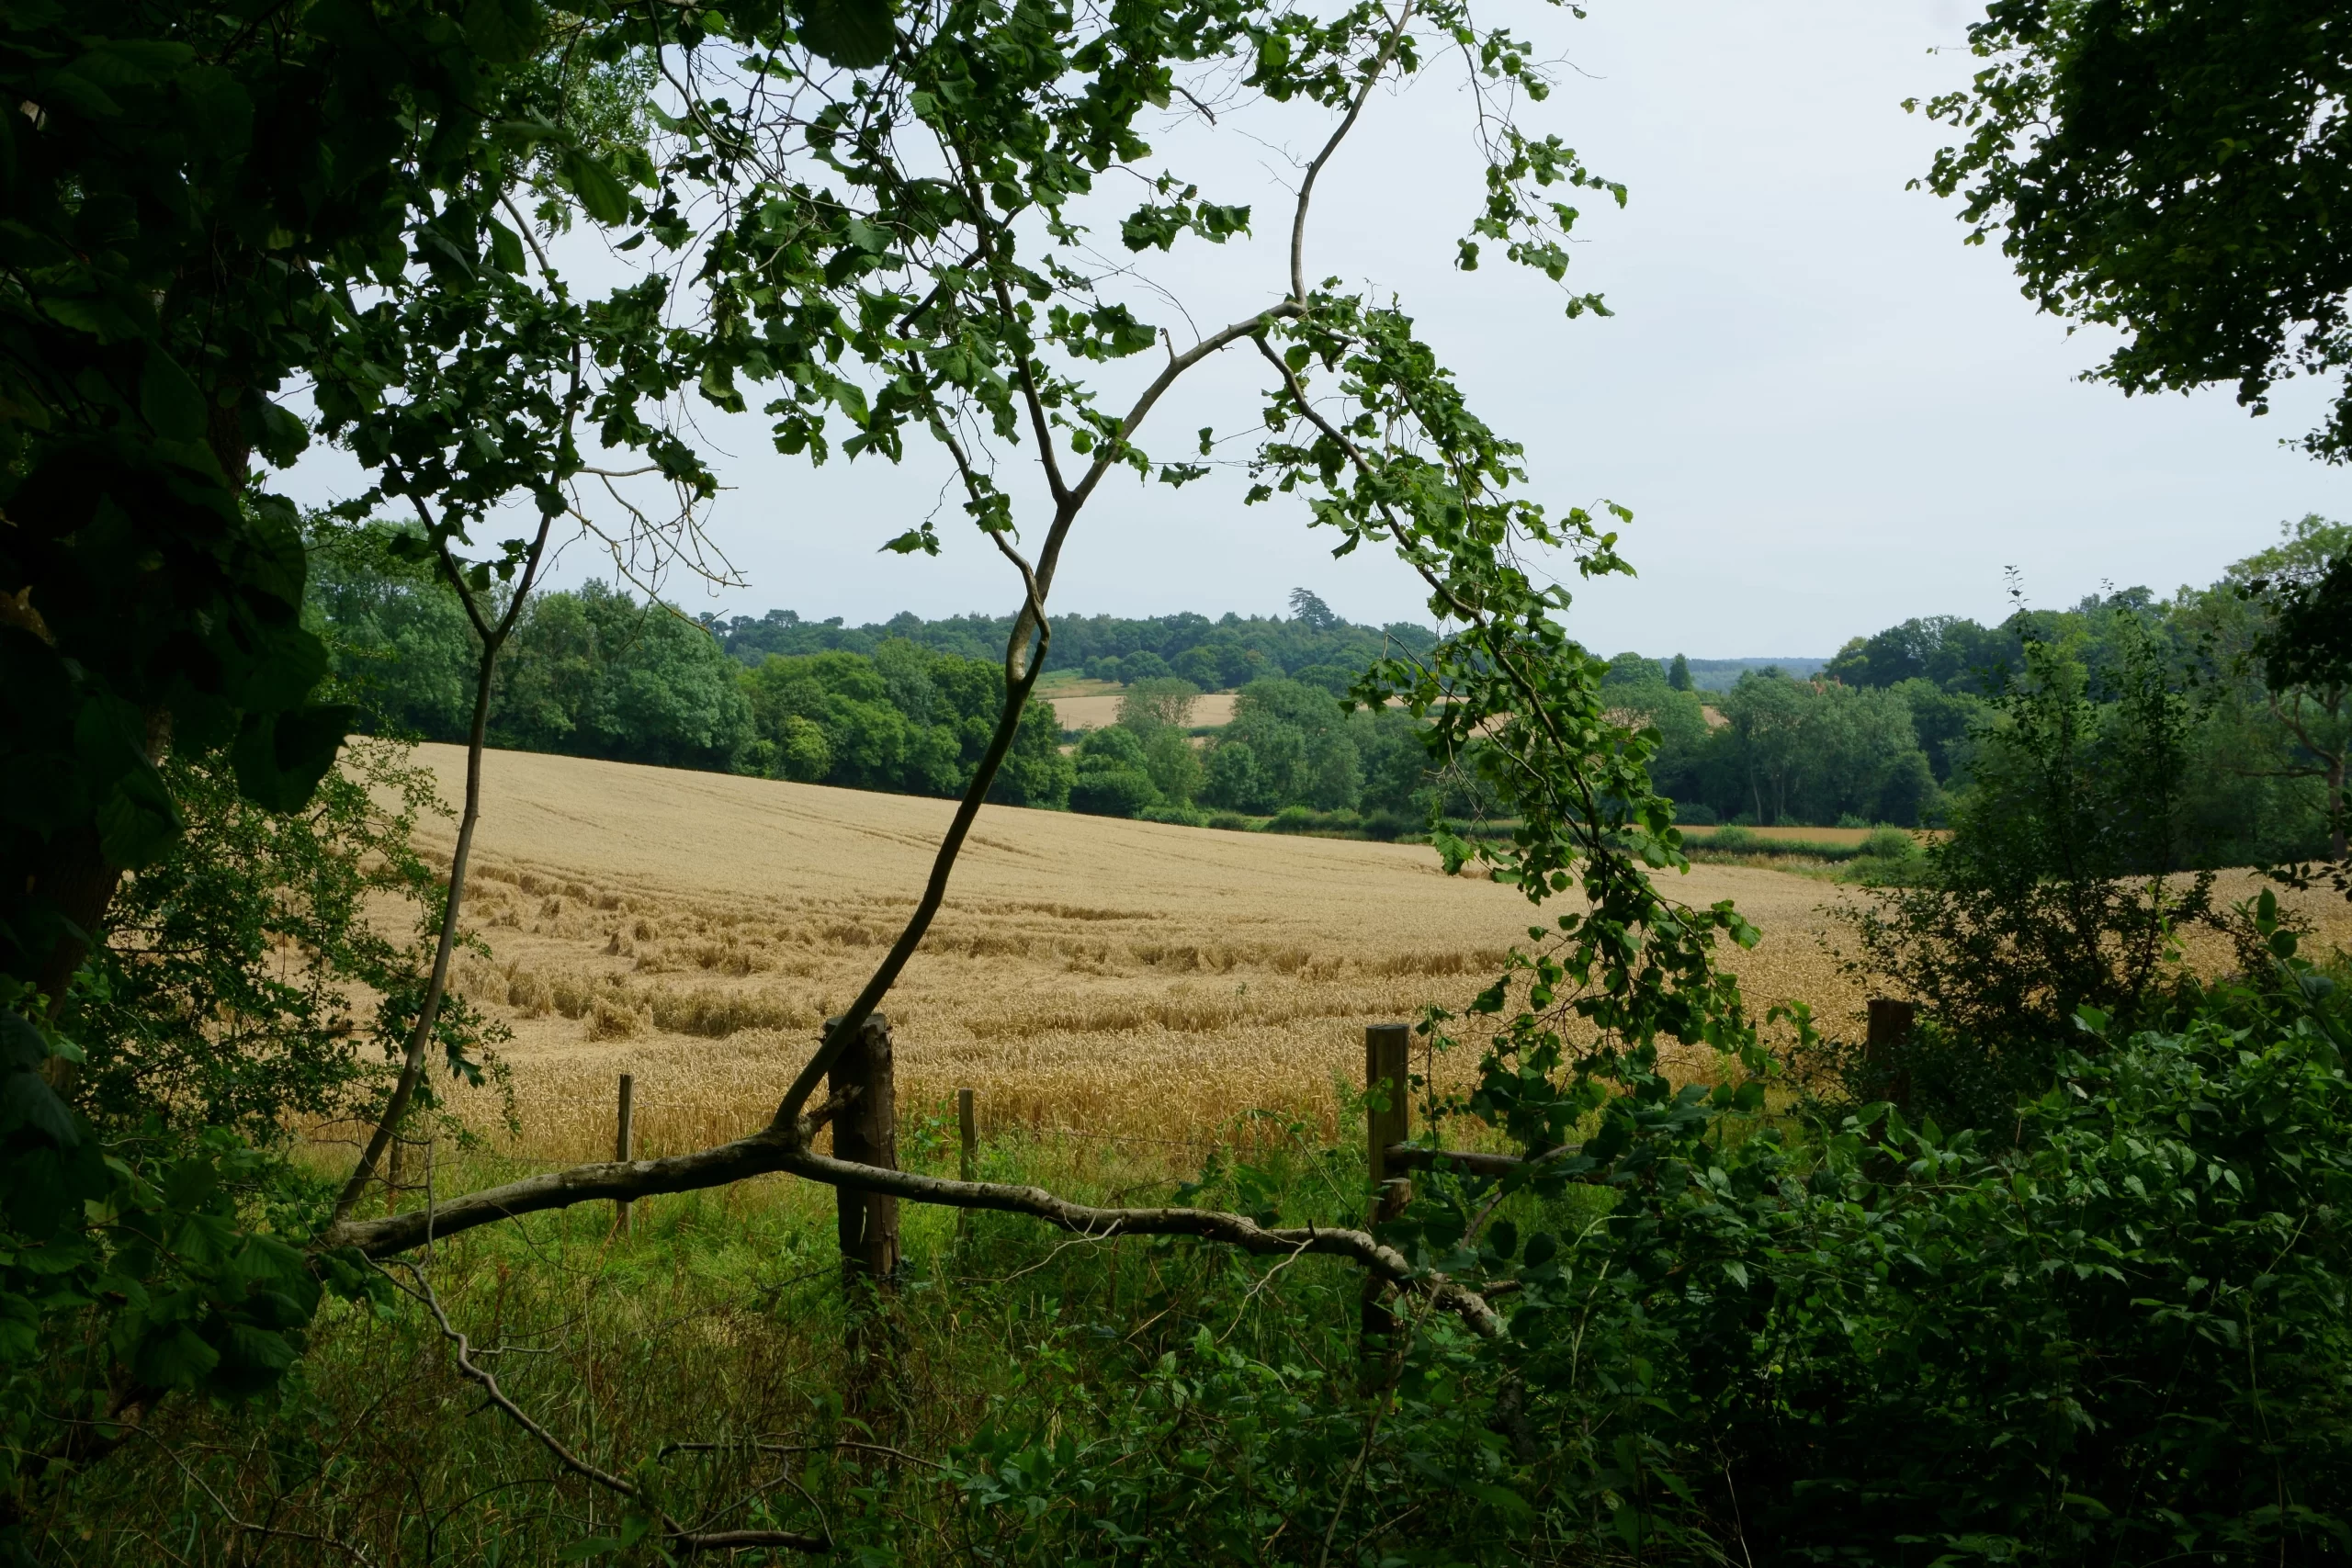 North Downs, Surrey, London, UK Published on August 14, 2019 SONY, ILCE-6000 Free to use under the Unsplash License The North Downs in Surrey, UK. Almost harvest time.